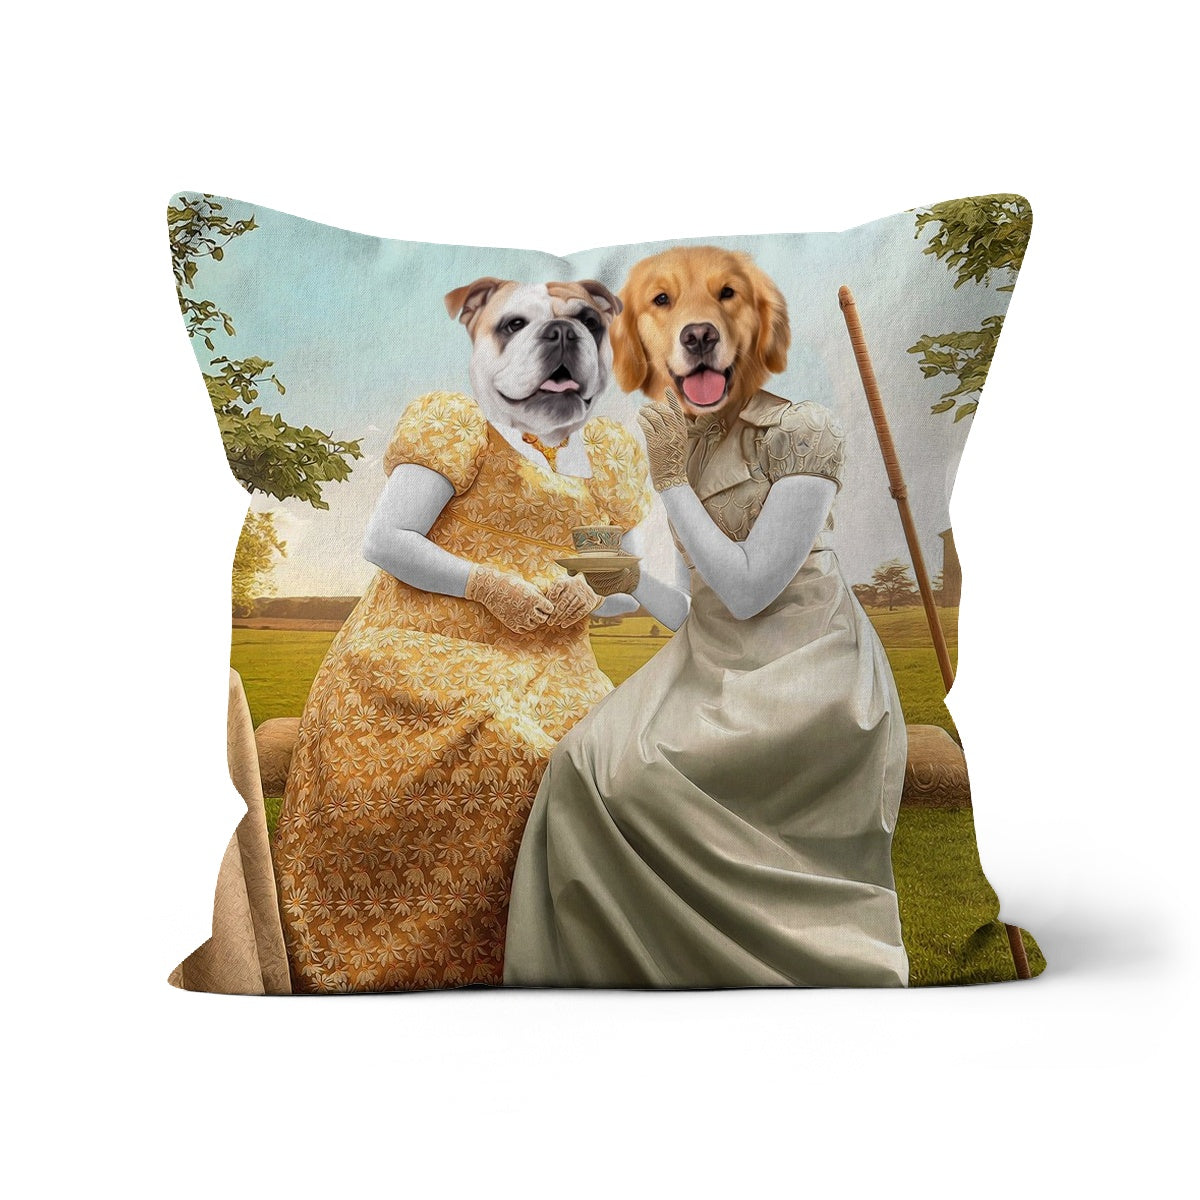 Paw & Glory, pawandglory, dog pillow custom, pillow that looks like your dog, pet picture on pillow, pillow custom, throw pillow personalized, create your own pillow, Pet Portrait cushion,